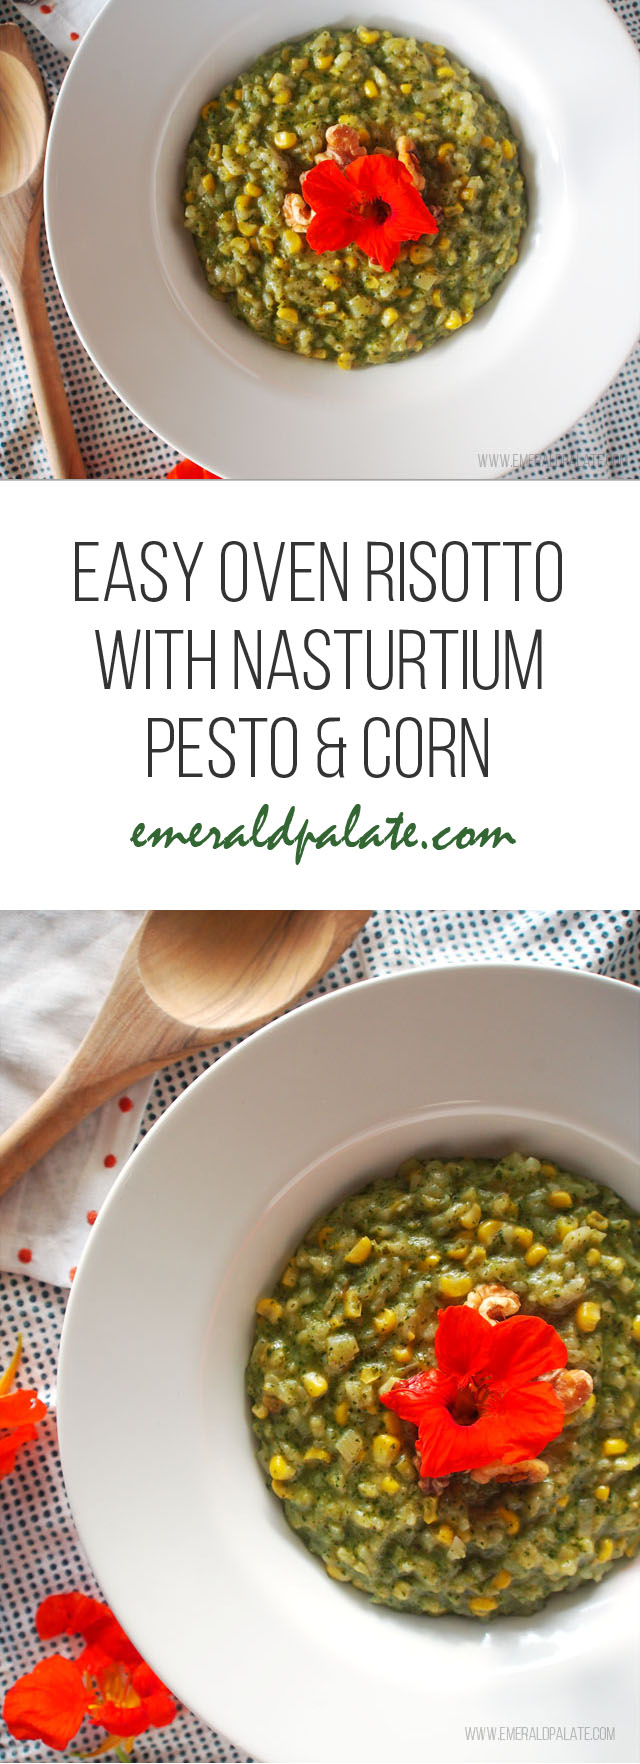 Easy oven risotto recipe with corn, nasturtium pesto, and homemade corn stock. it is the perfect vegetarian risotto recipe that is fairly quick to make compared to traditional risotto recipes!